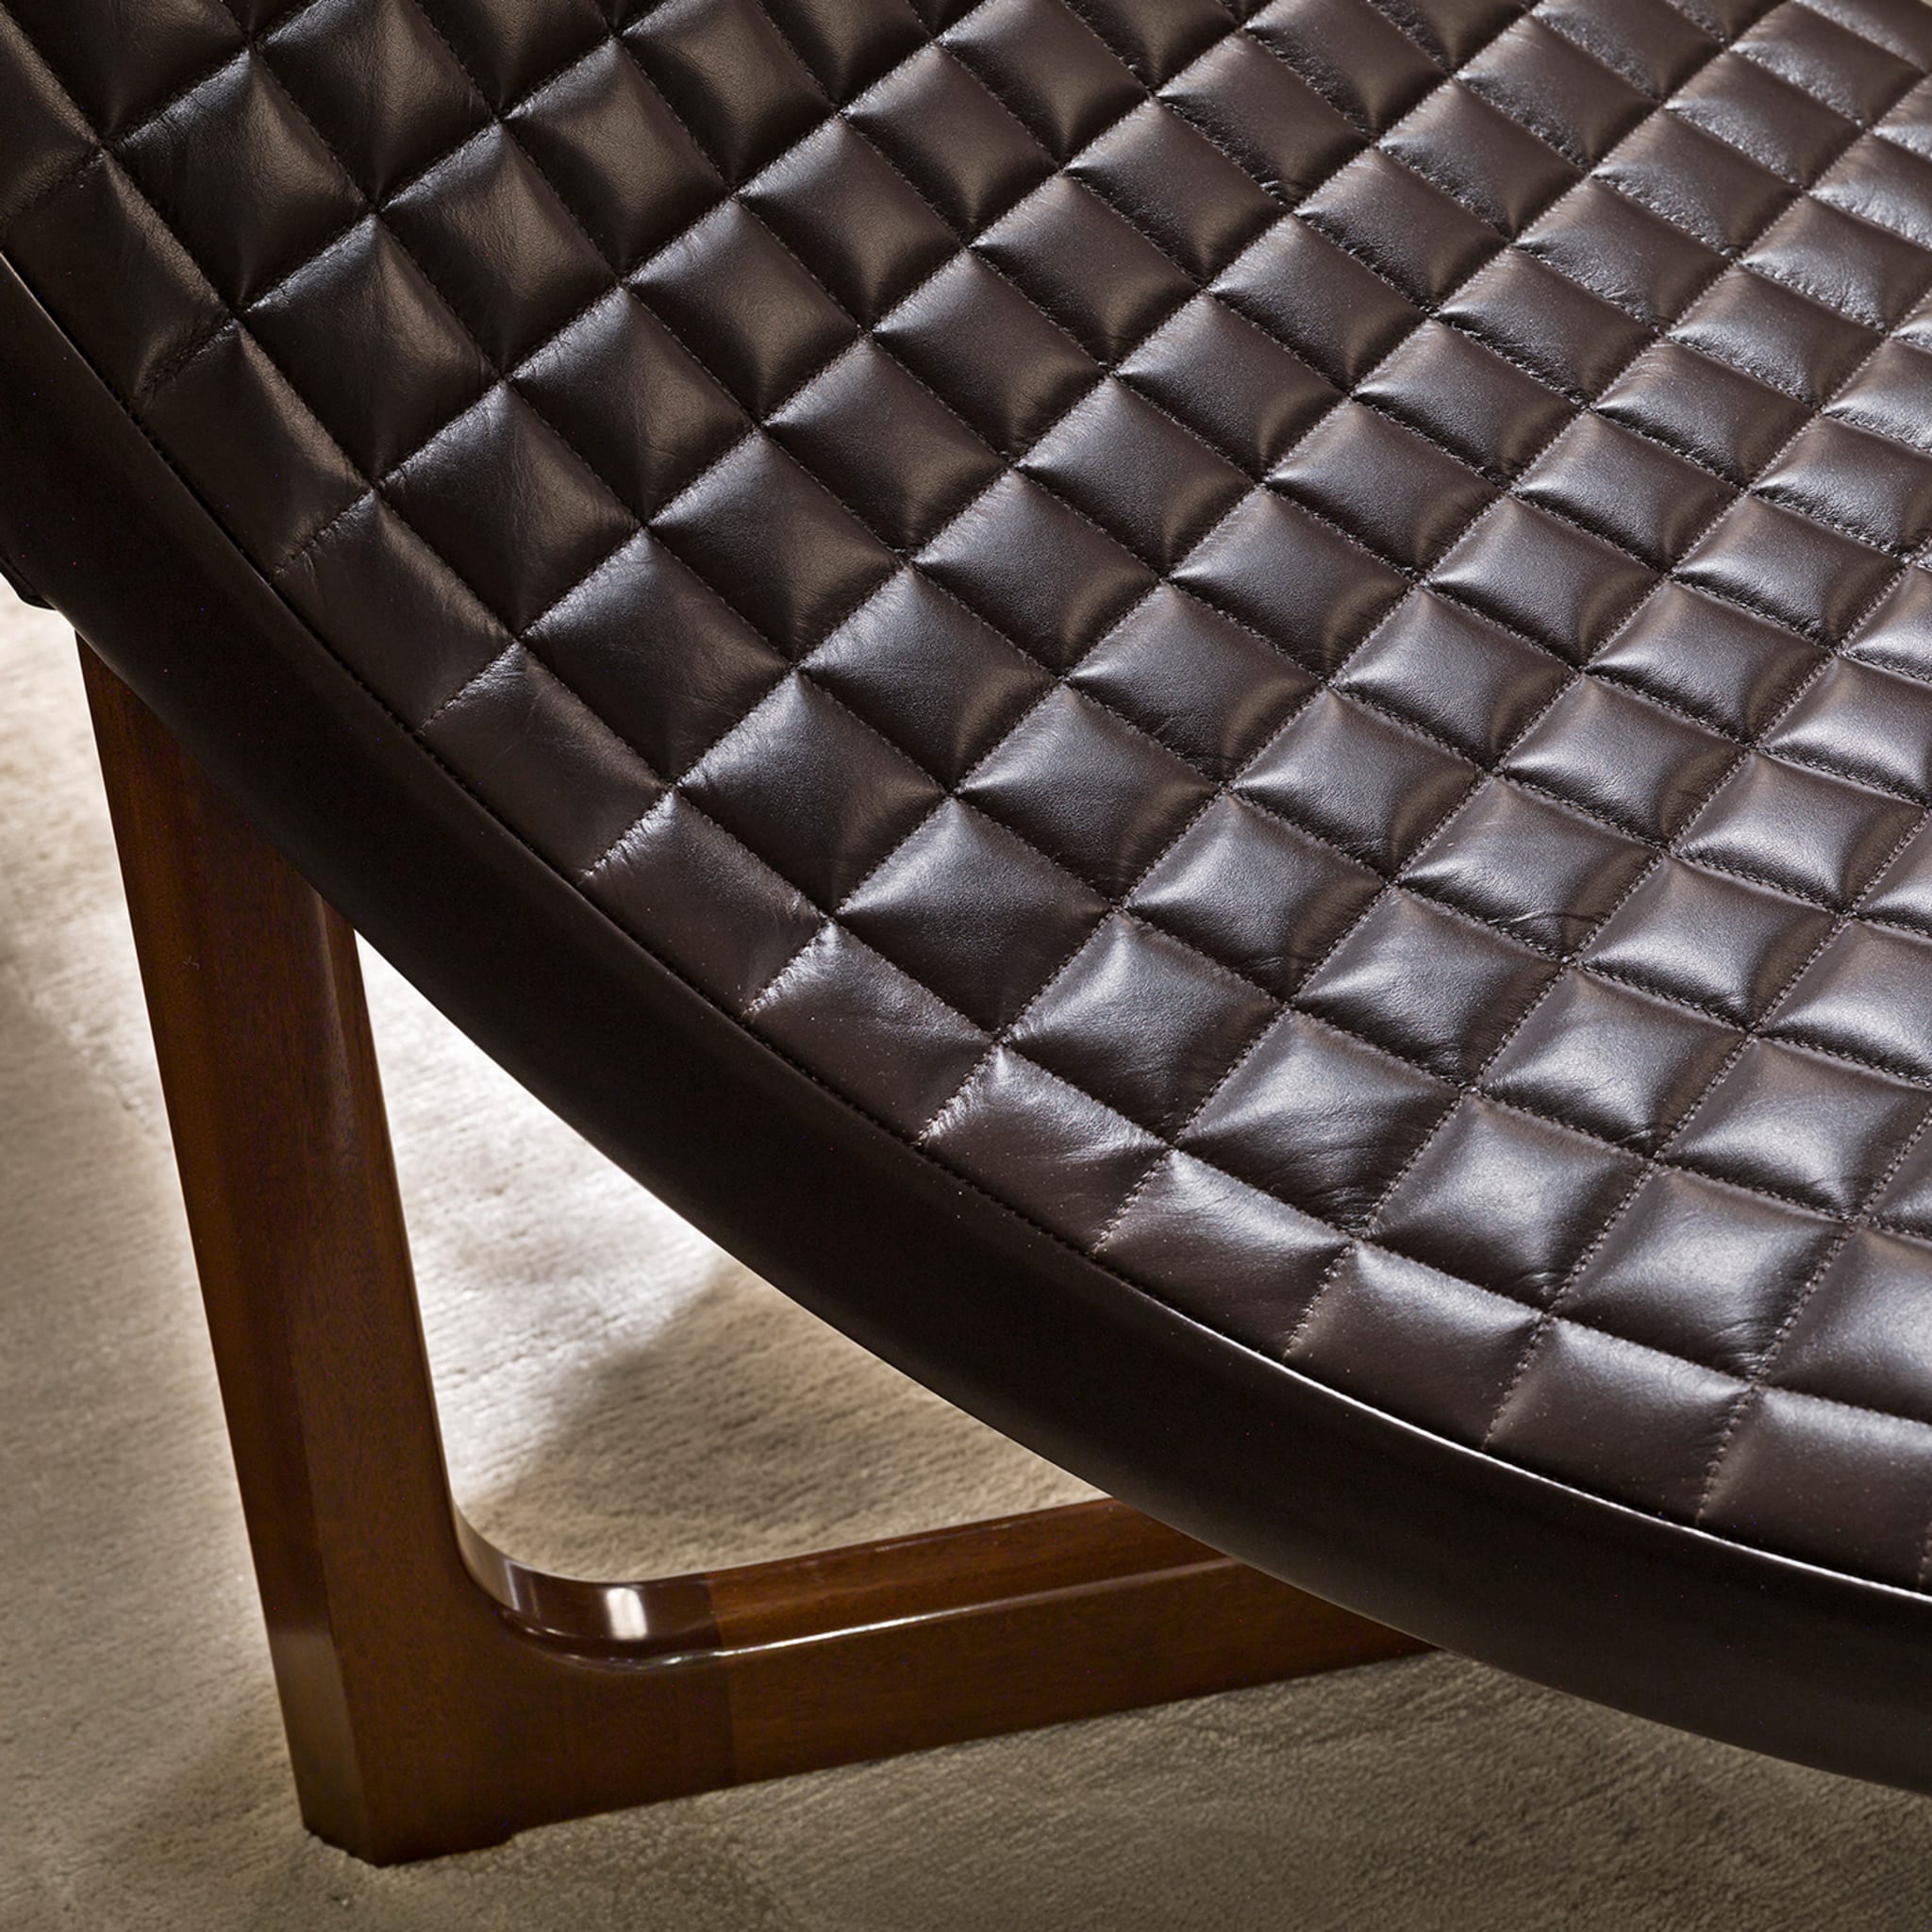 Leather and Mahogany Chaise Longue - Alternative view 1